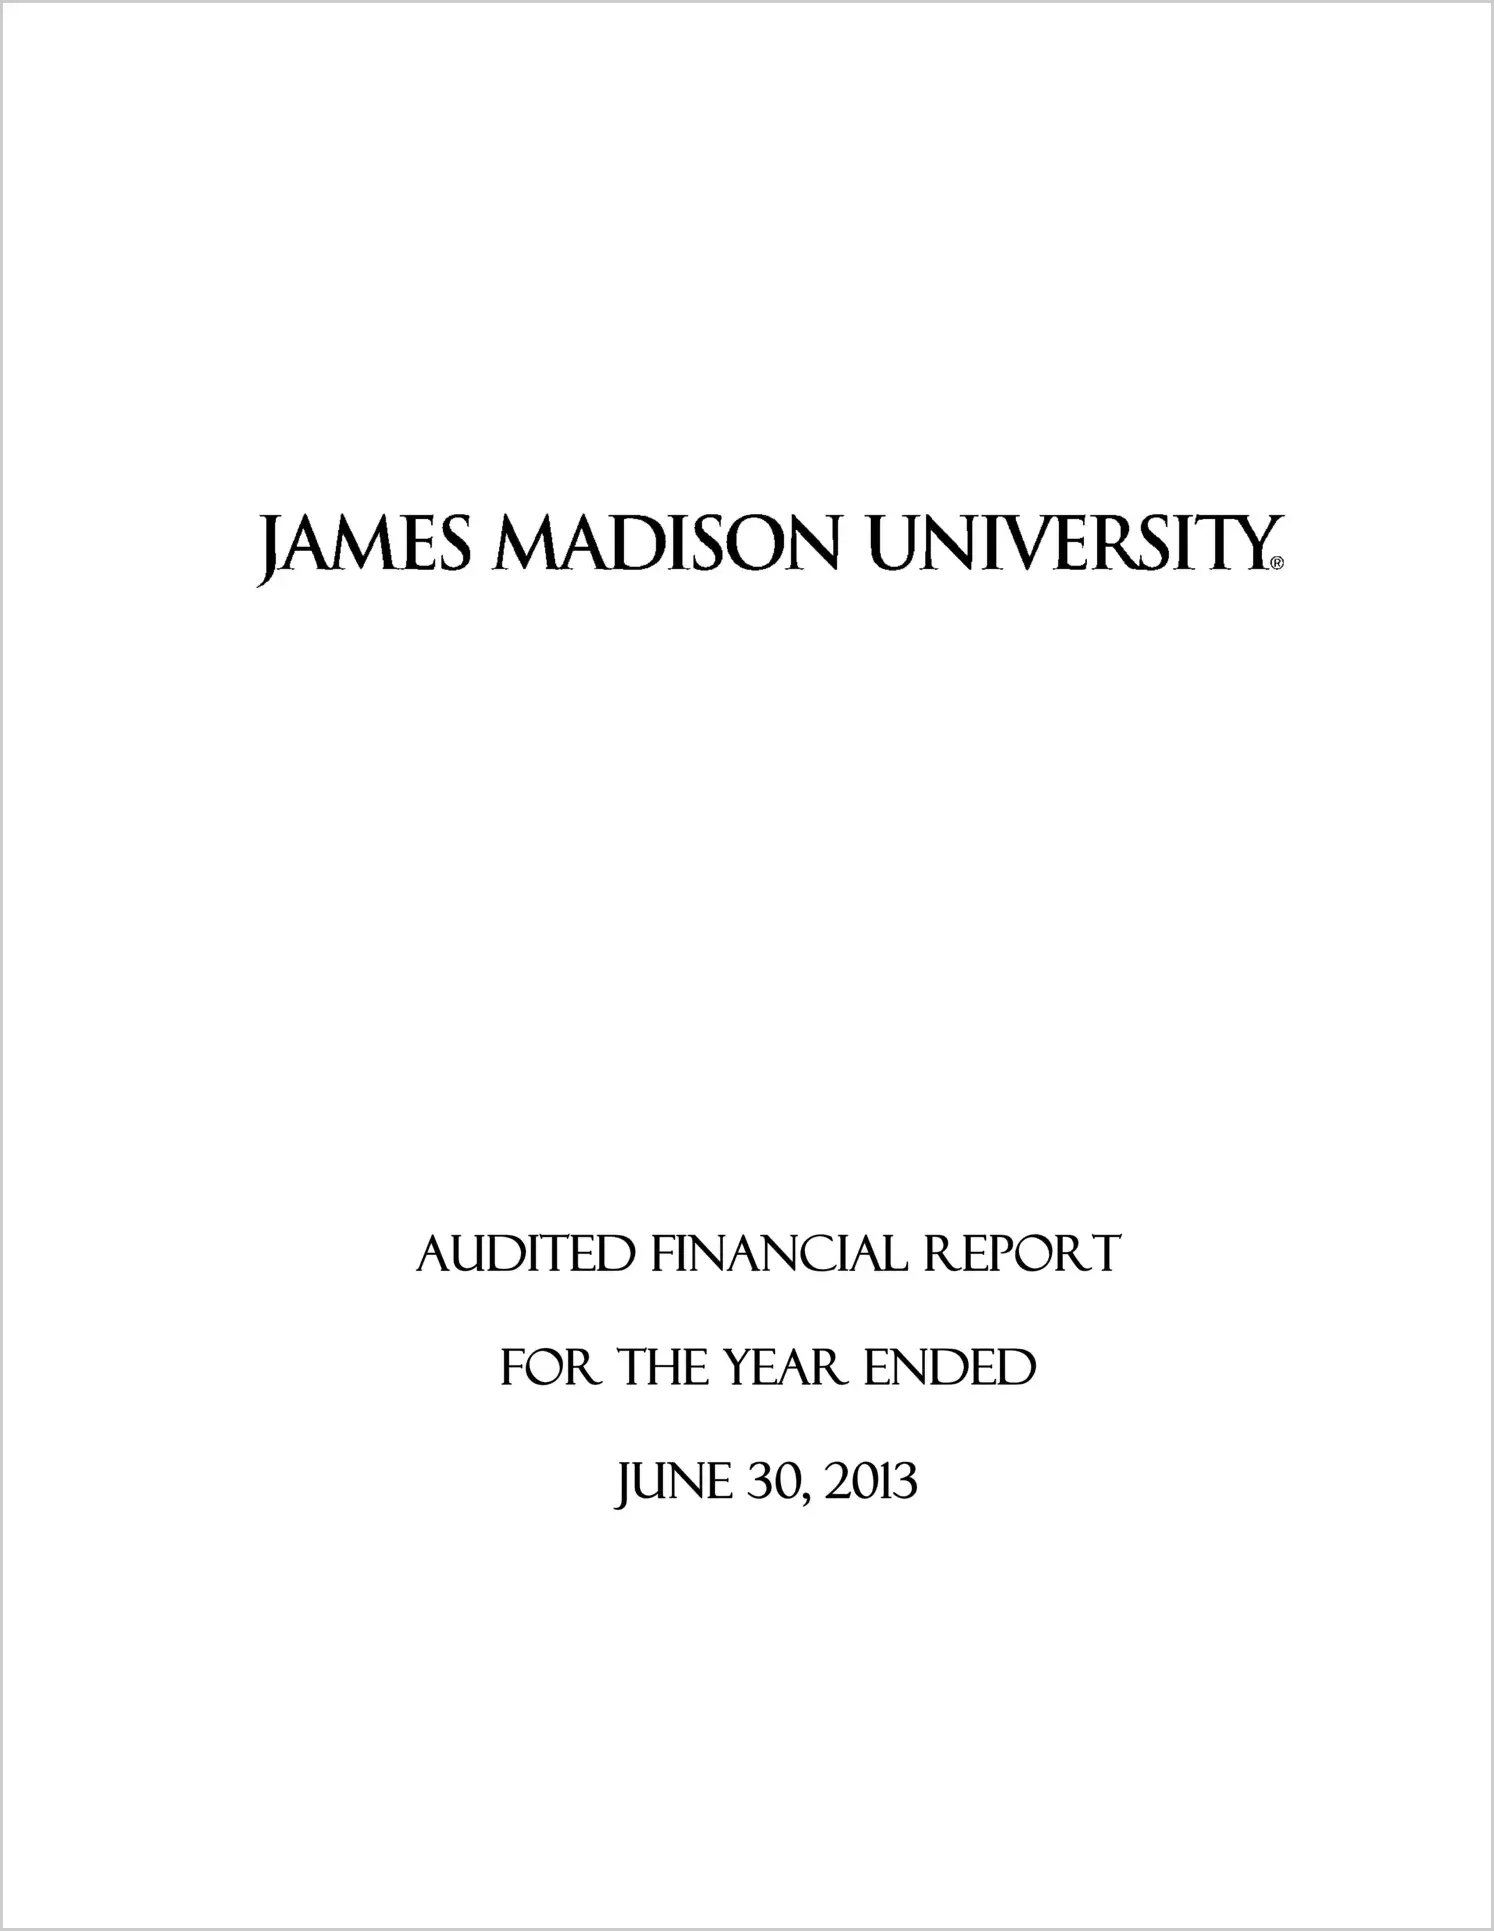 James Madison University Financial Statements for the year ended June 30, 2013